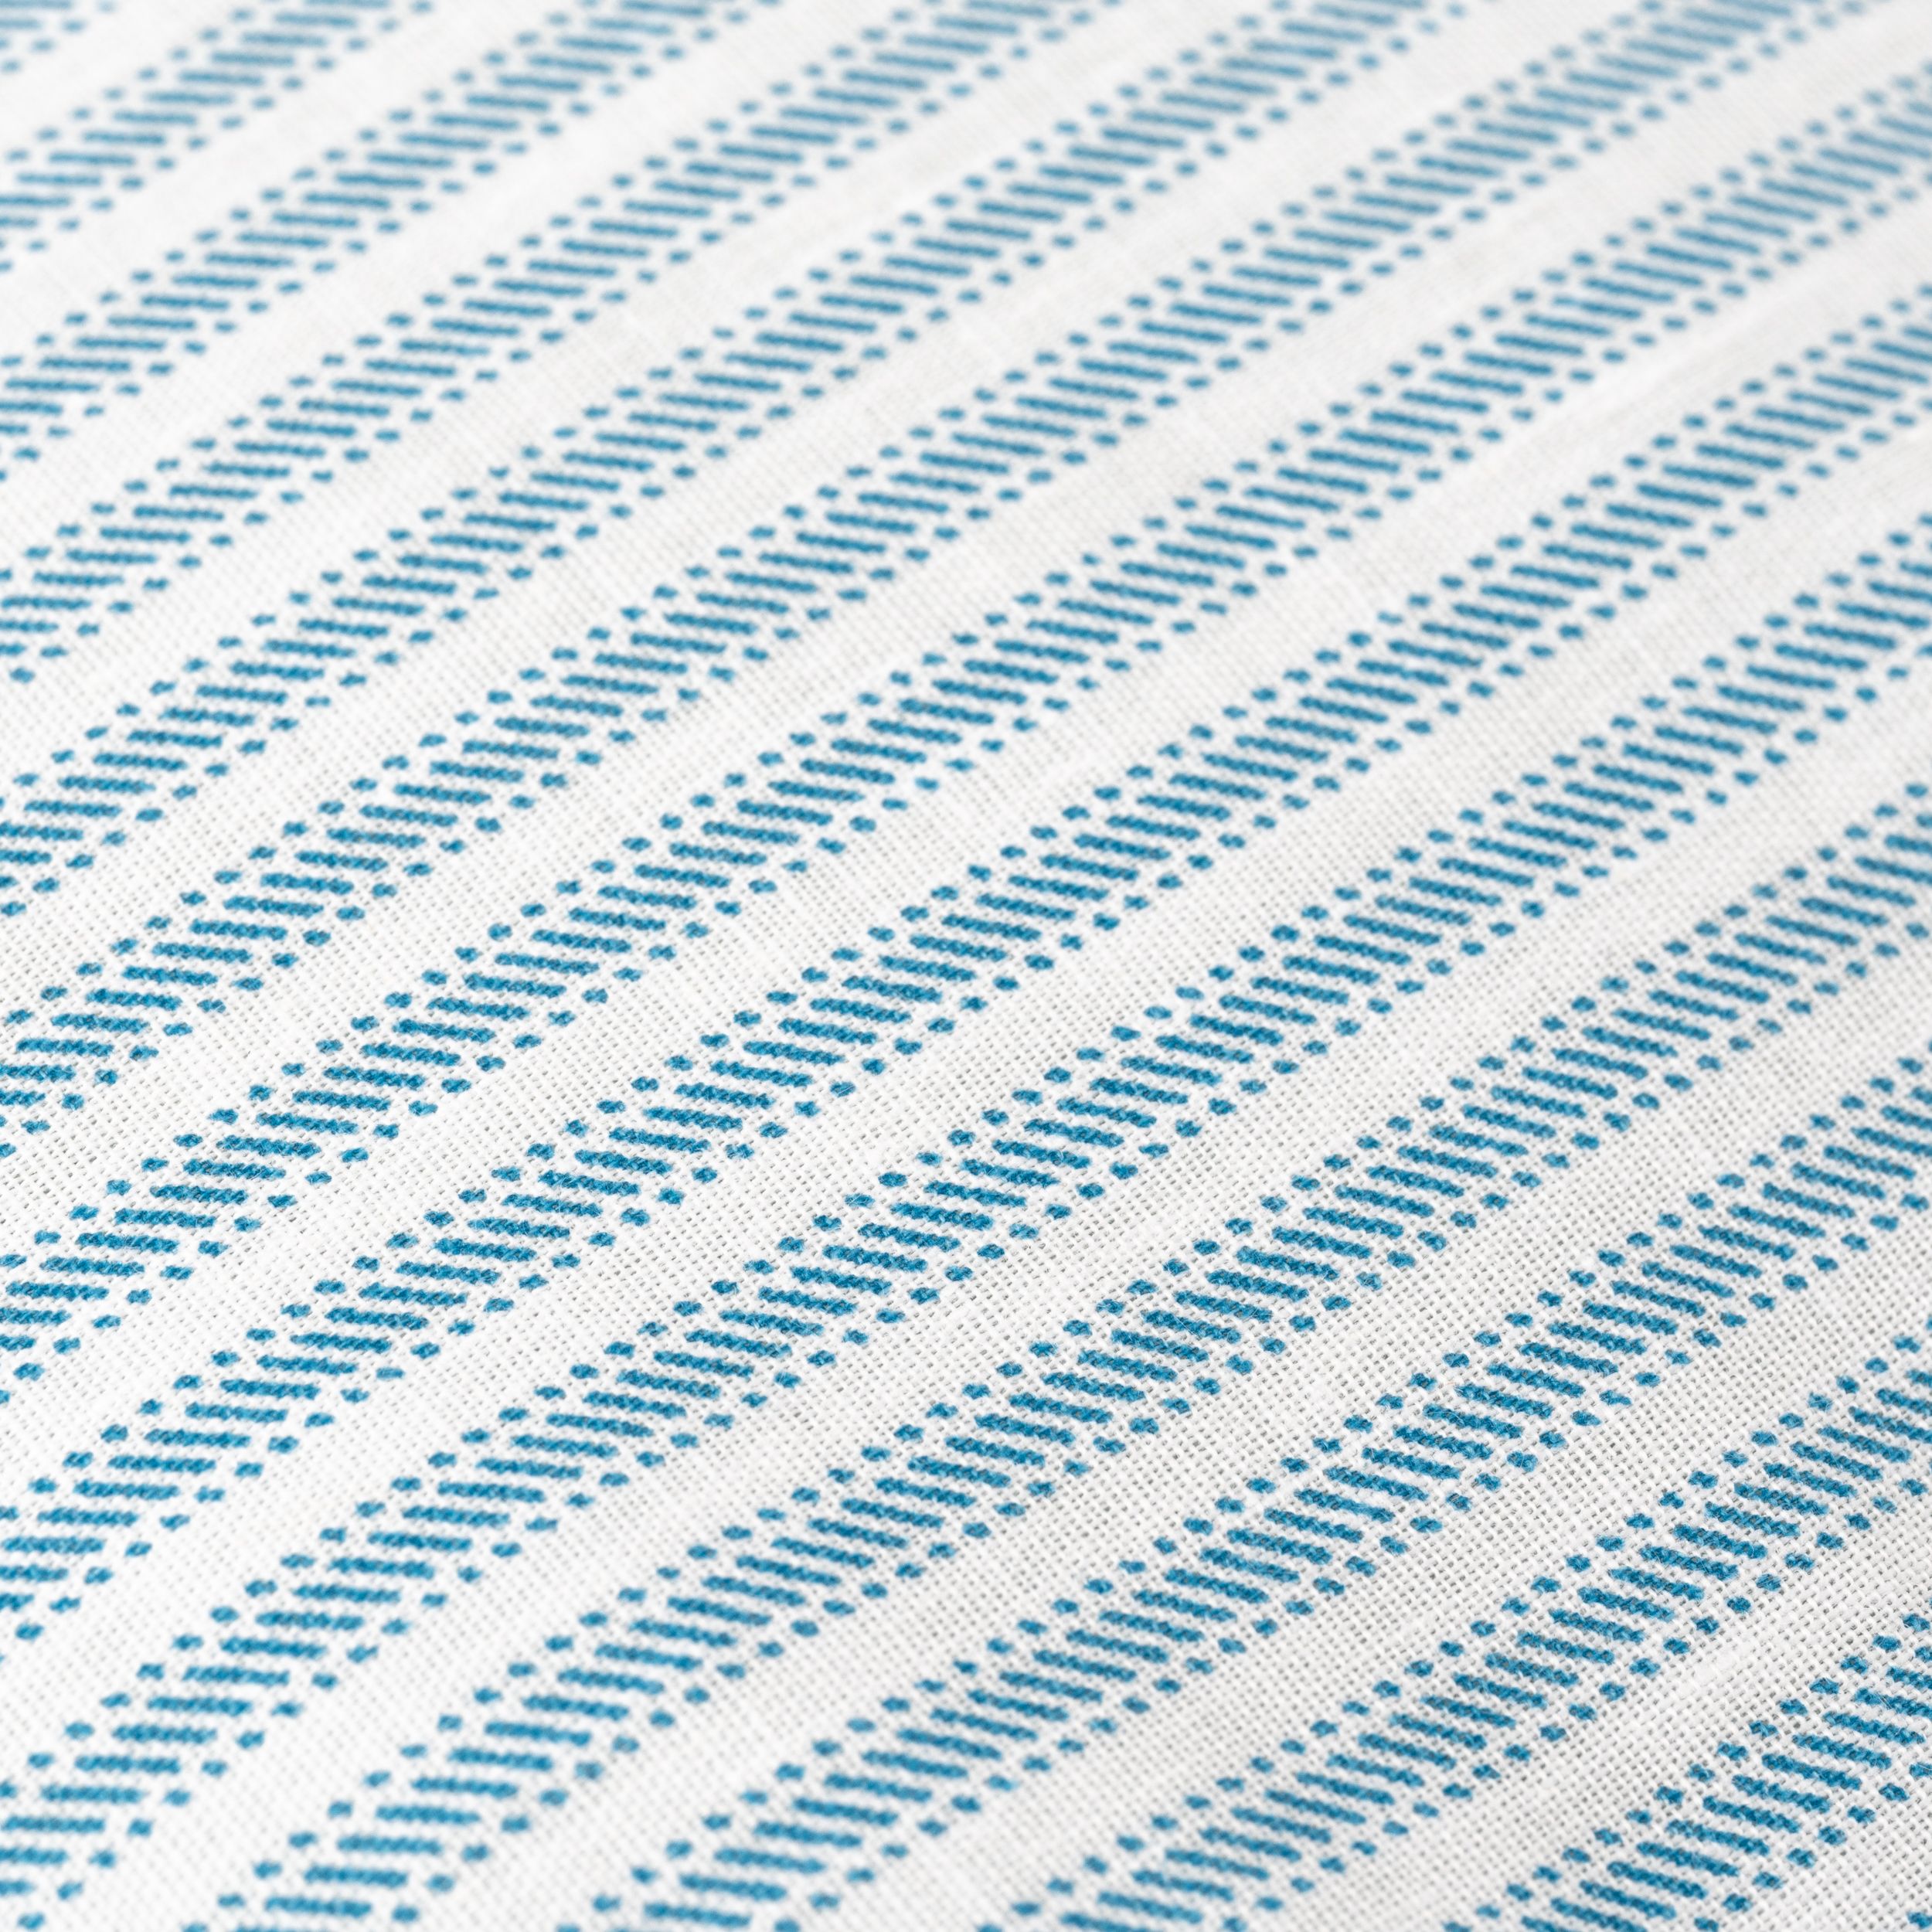 Mainstays HUGE Pillow 20" x 28" in Blue and White Stripe - image 5 of 8